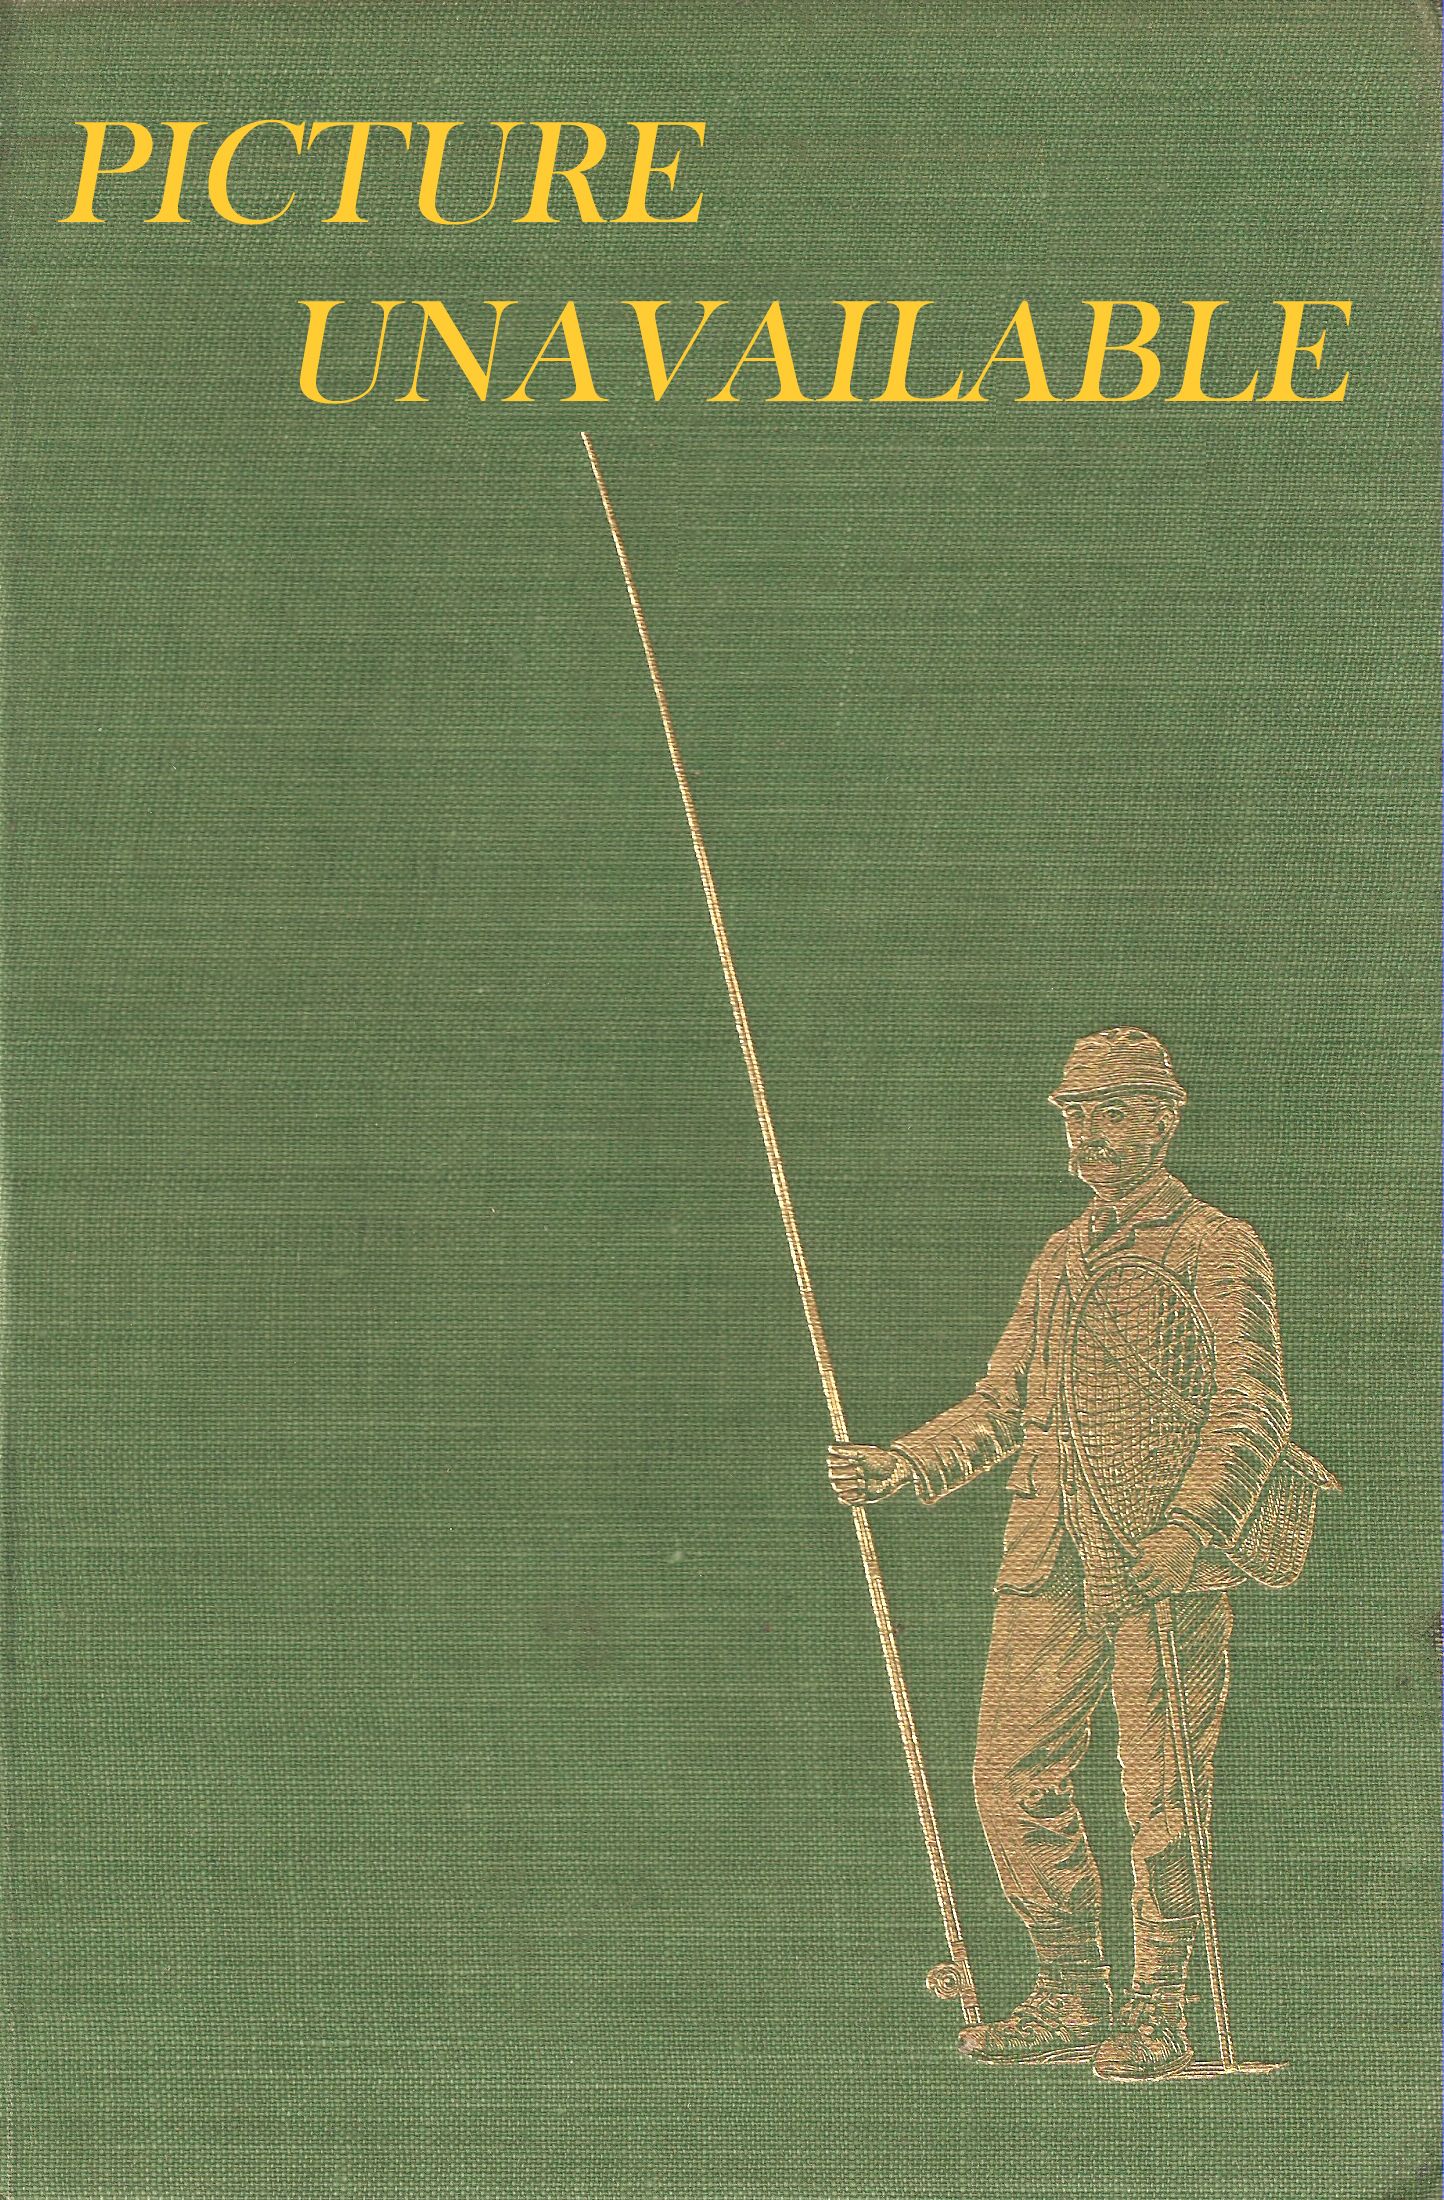 A GUIDE TO THE FISHING INNS OF SCOTLAND. Compiled by R. Crombie Saunders.